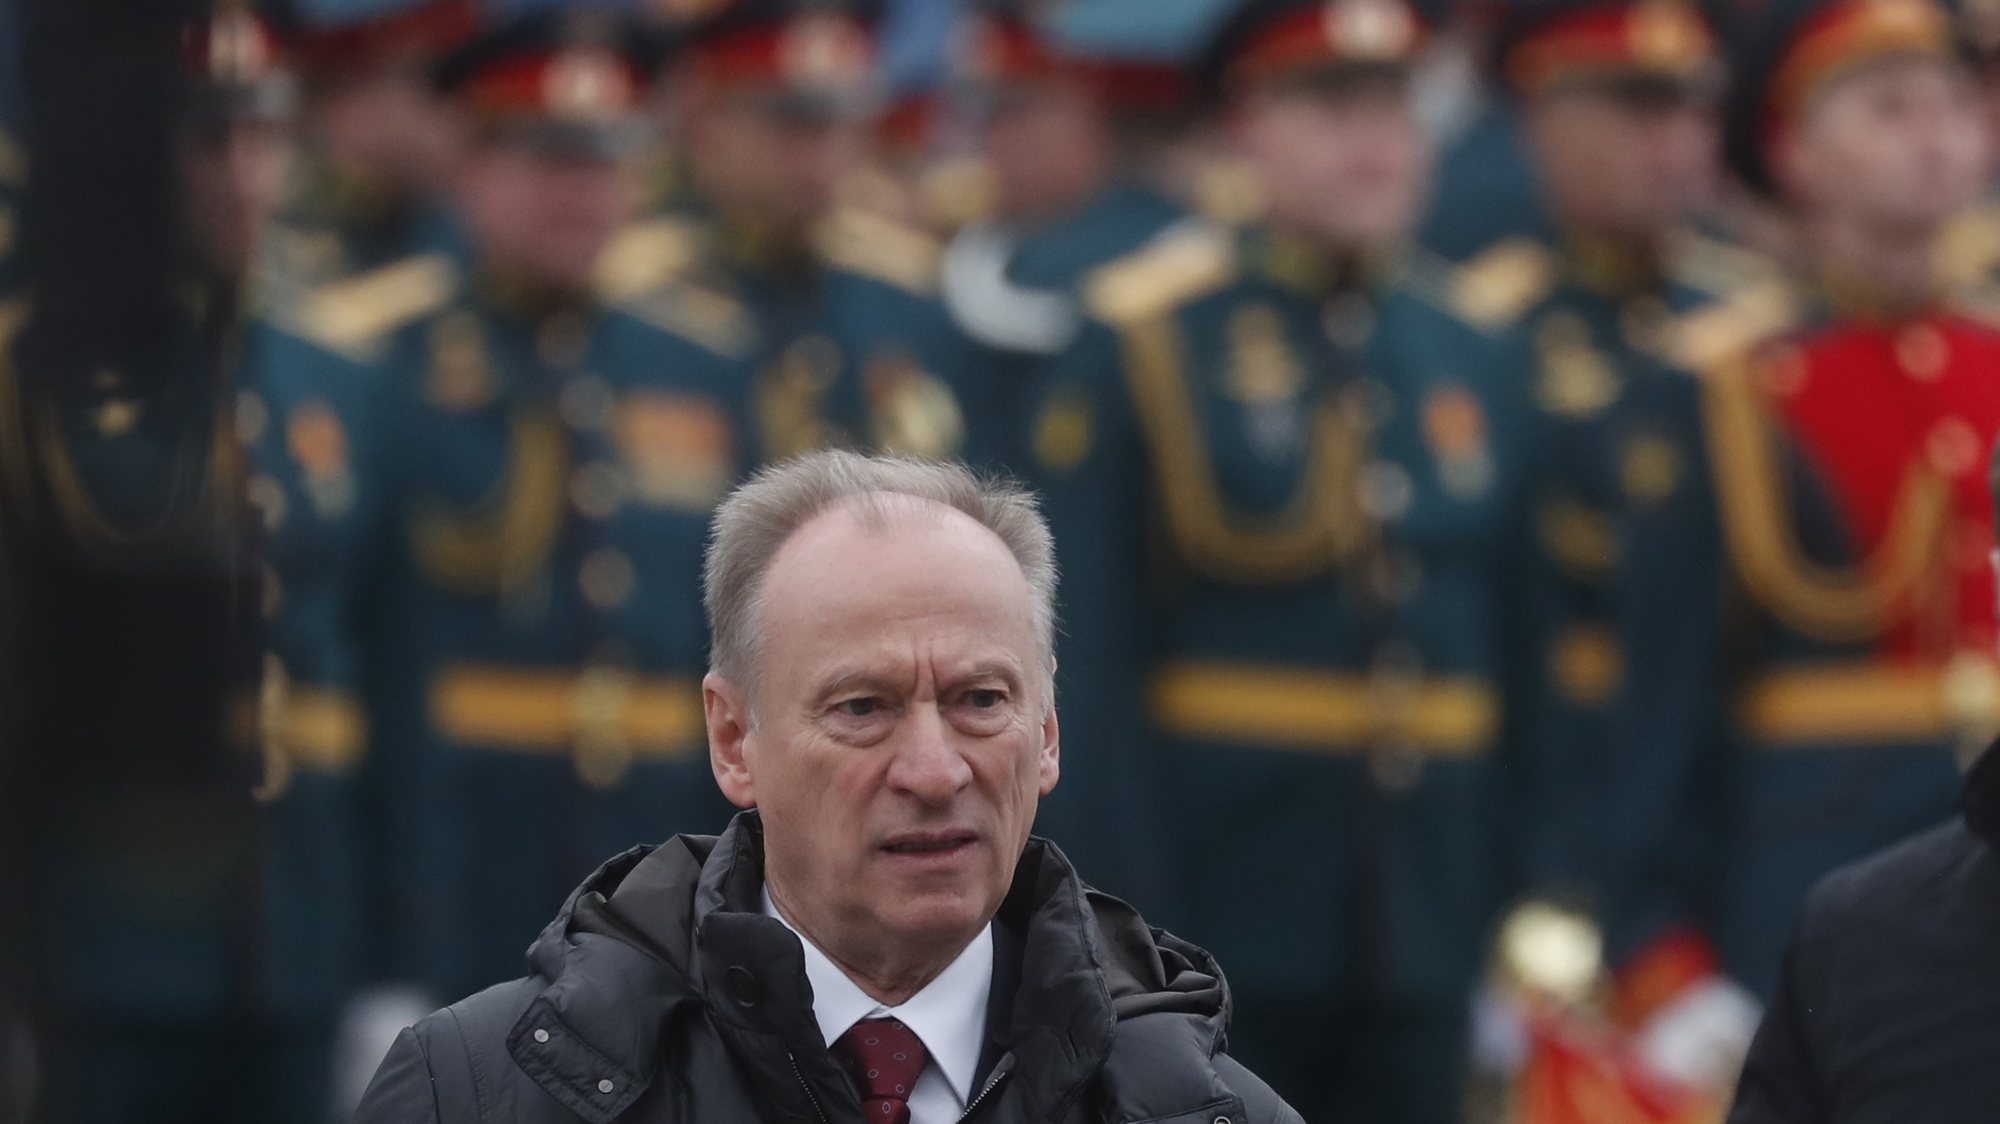 epa09187154 Russia&#039;s Security Council Secretary Nikolai Patrushev arrives to watch the Victory Day military parade in the Red Square in Moscow, Russia, 09 May 2021. The Victory Day military parade annually takes place 09 May 2021 in the Red Square to mark the victory of the Soviet Union over the Nazi Germany in the World War II.  EPA/MAXIM SHIPENKOV